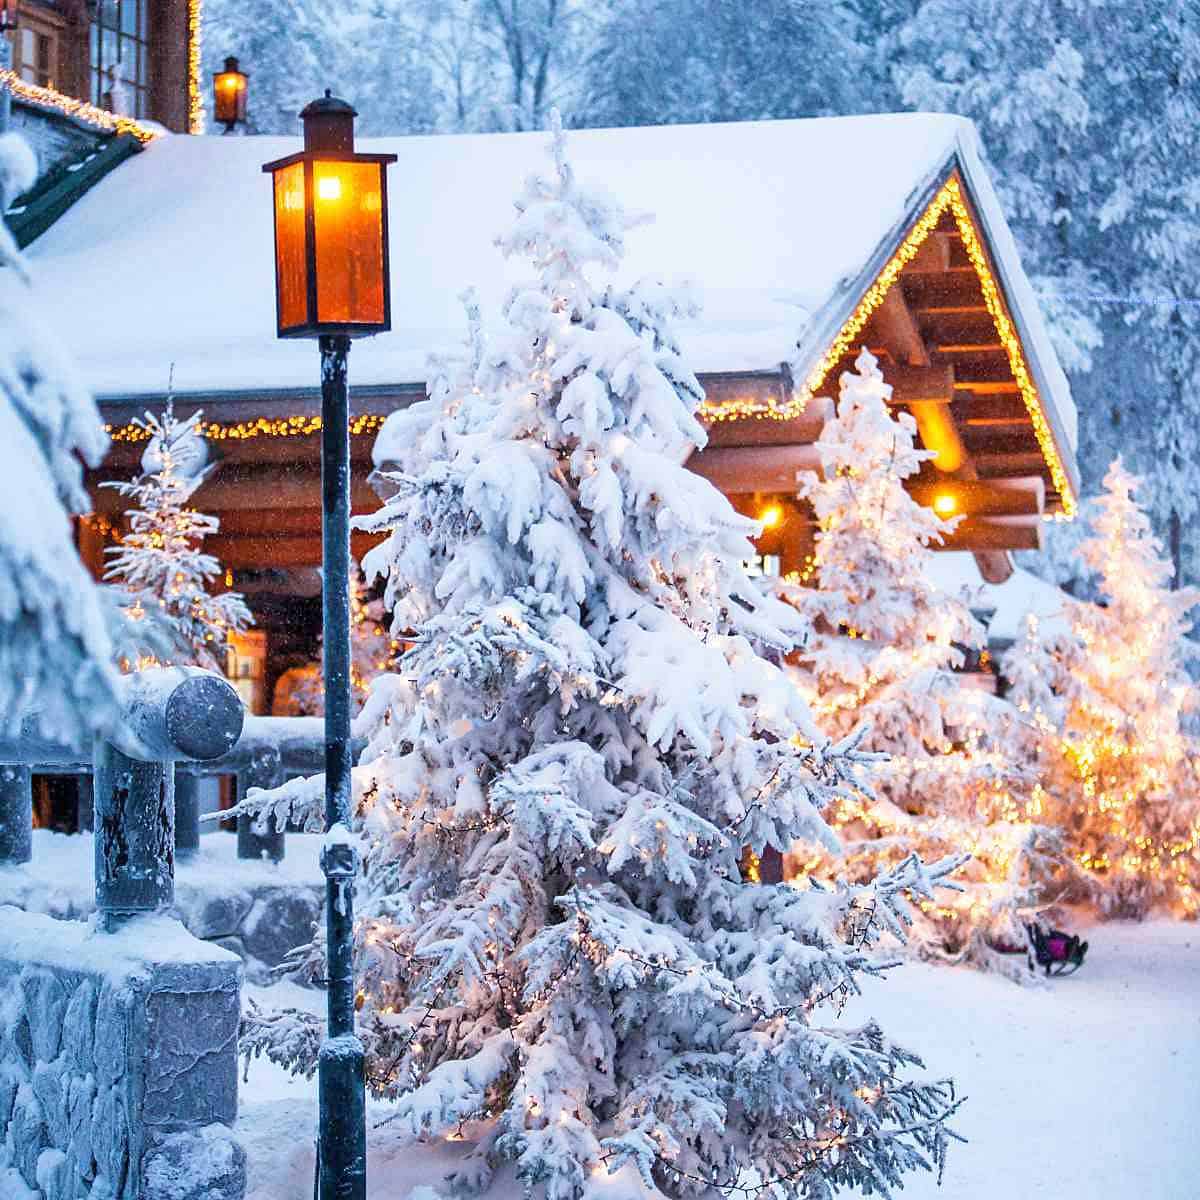 A snowy cabin decorated with little white Christmas lights.